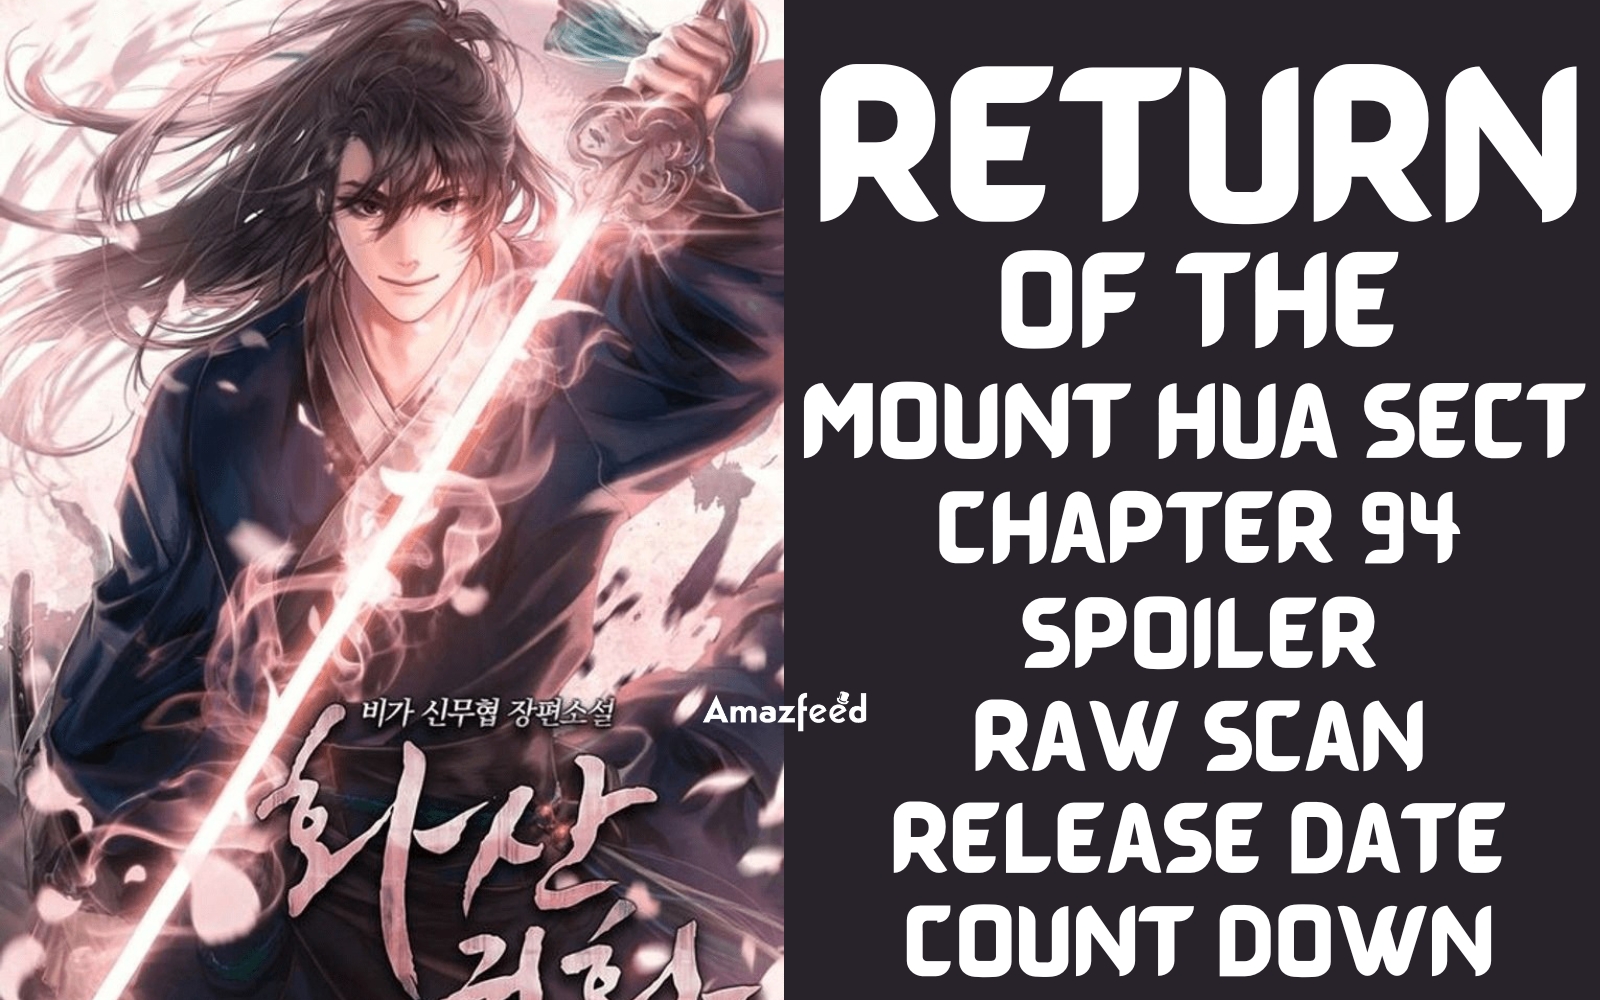 Return Of The Mount Hua Sect Chapter 94 Spoiler, Raw Scan, Color Page, Release Date, Countdown